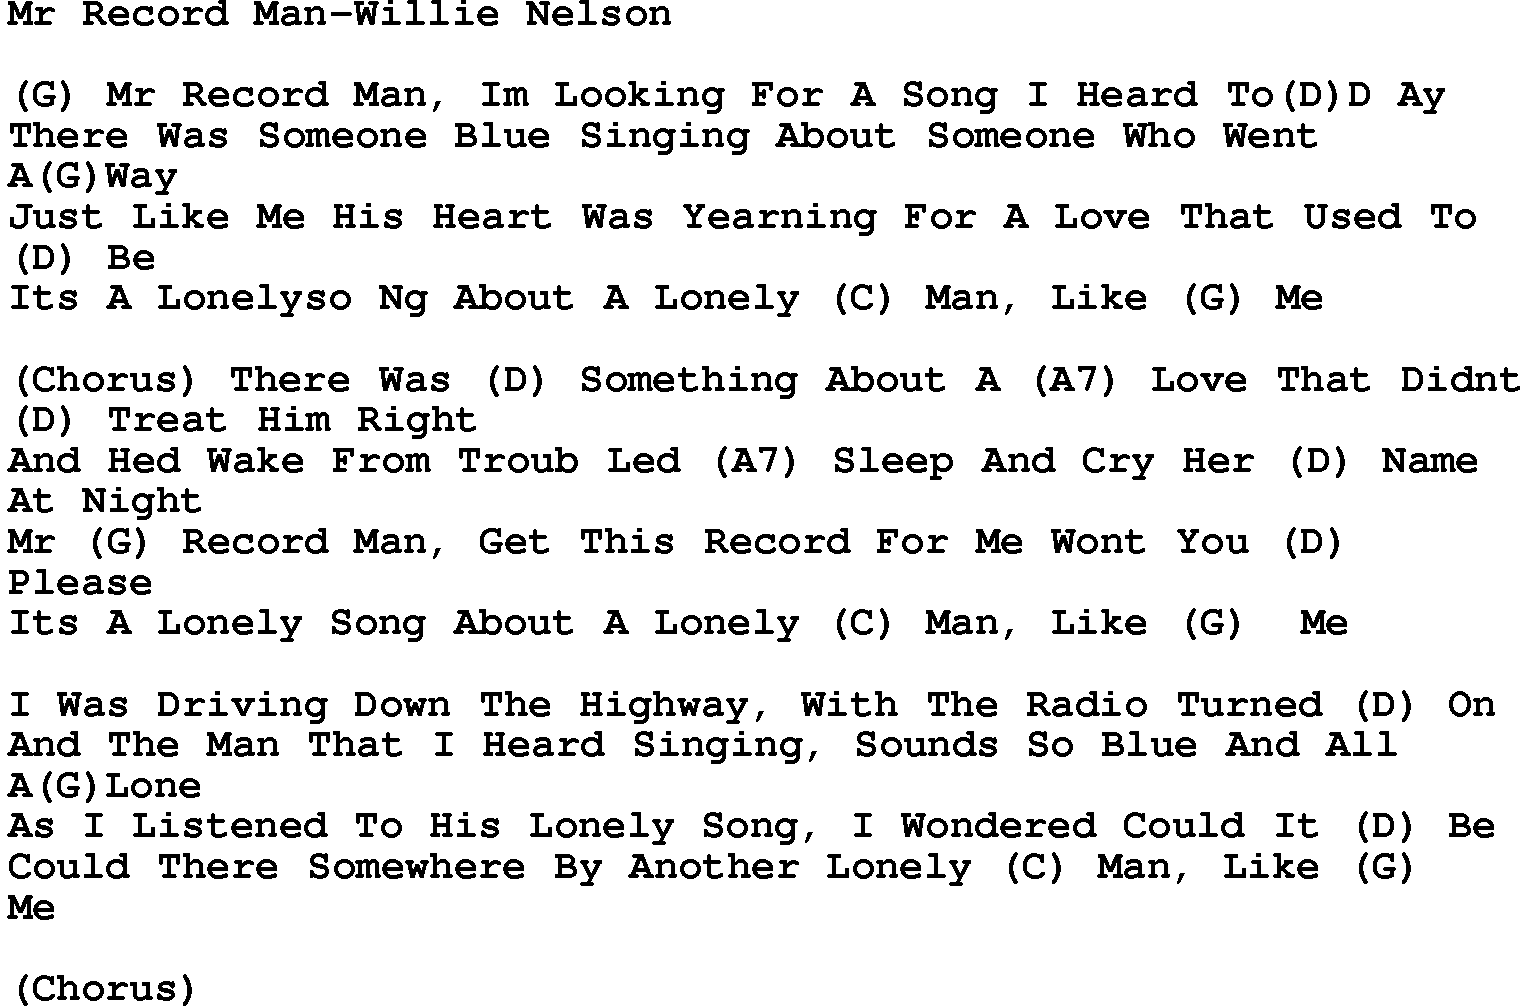 Country music song: Mr Record Man-Willie Nelson lyrics and chords